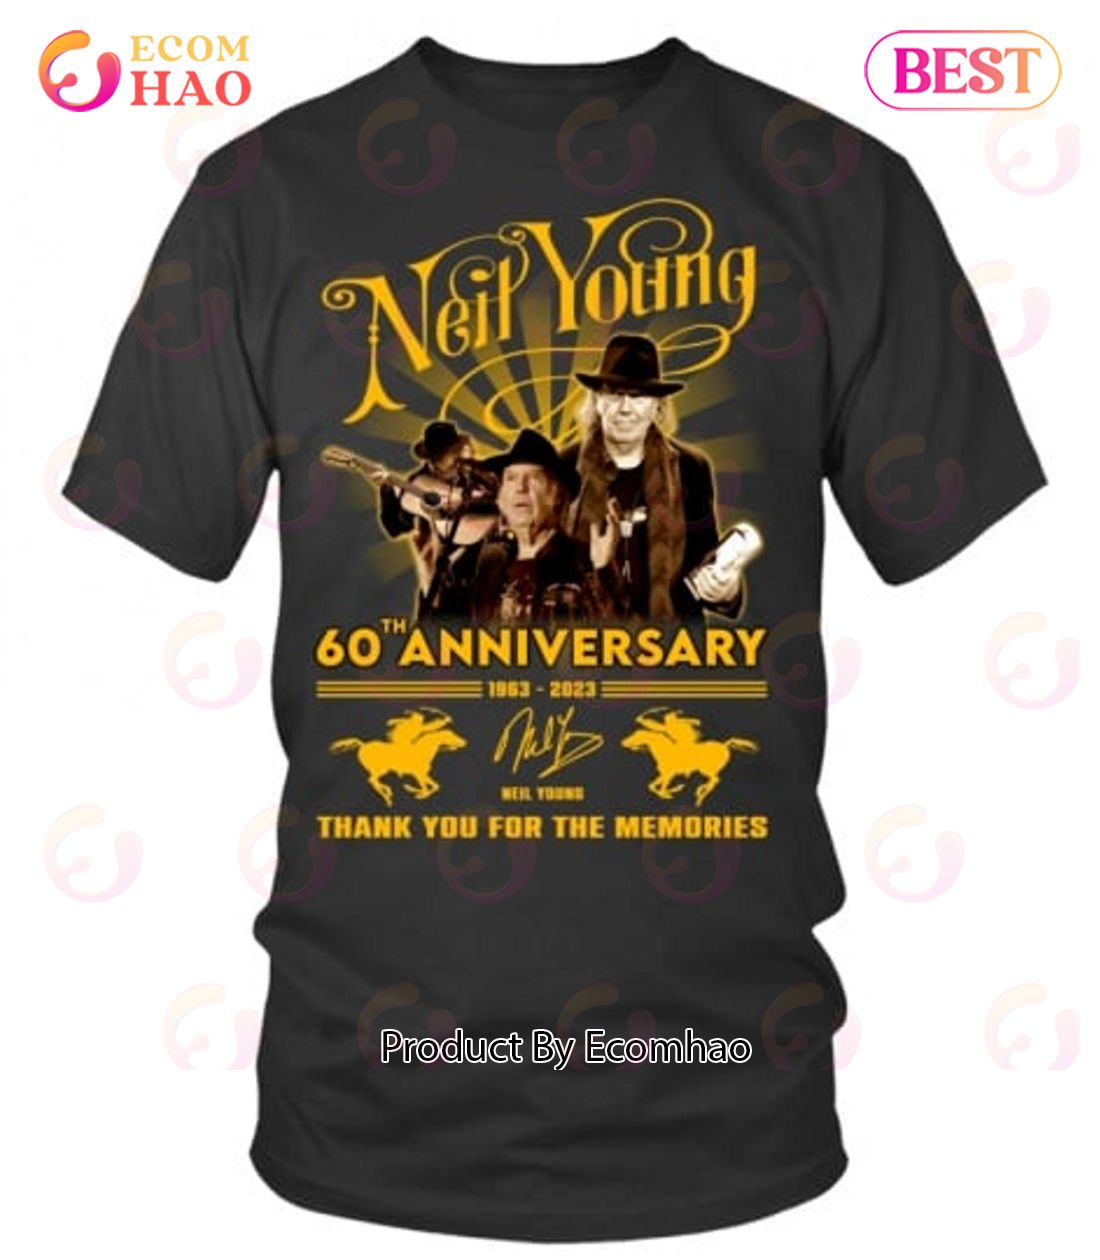 Neil Young 60th Anniversary 1963 – 2023 Thank You For The Memories T-Shirt